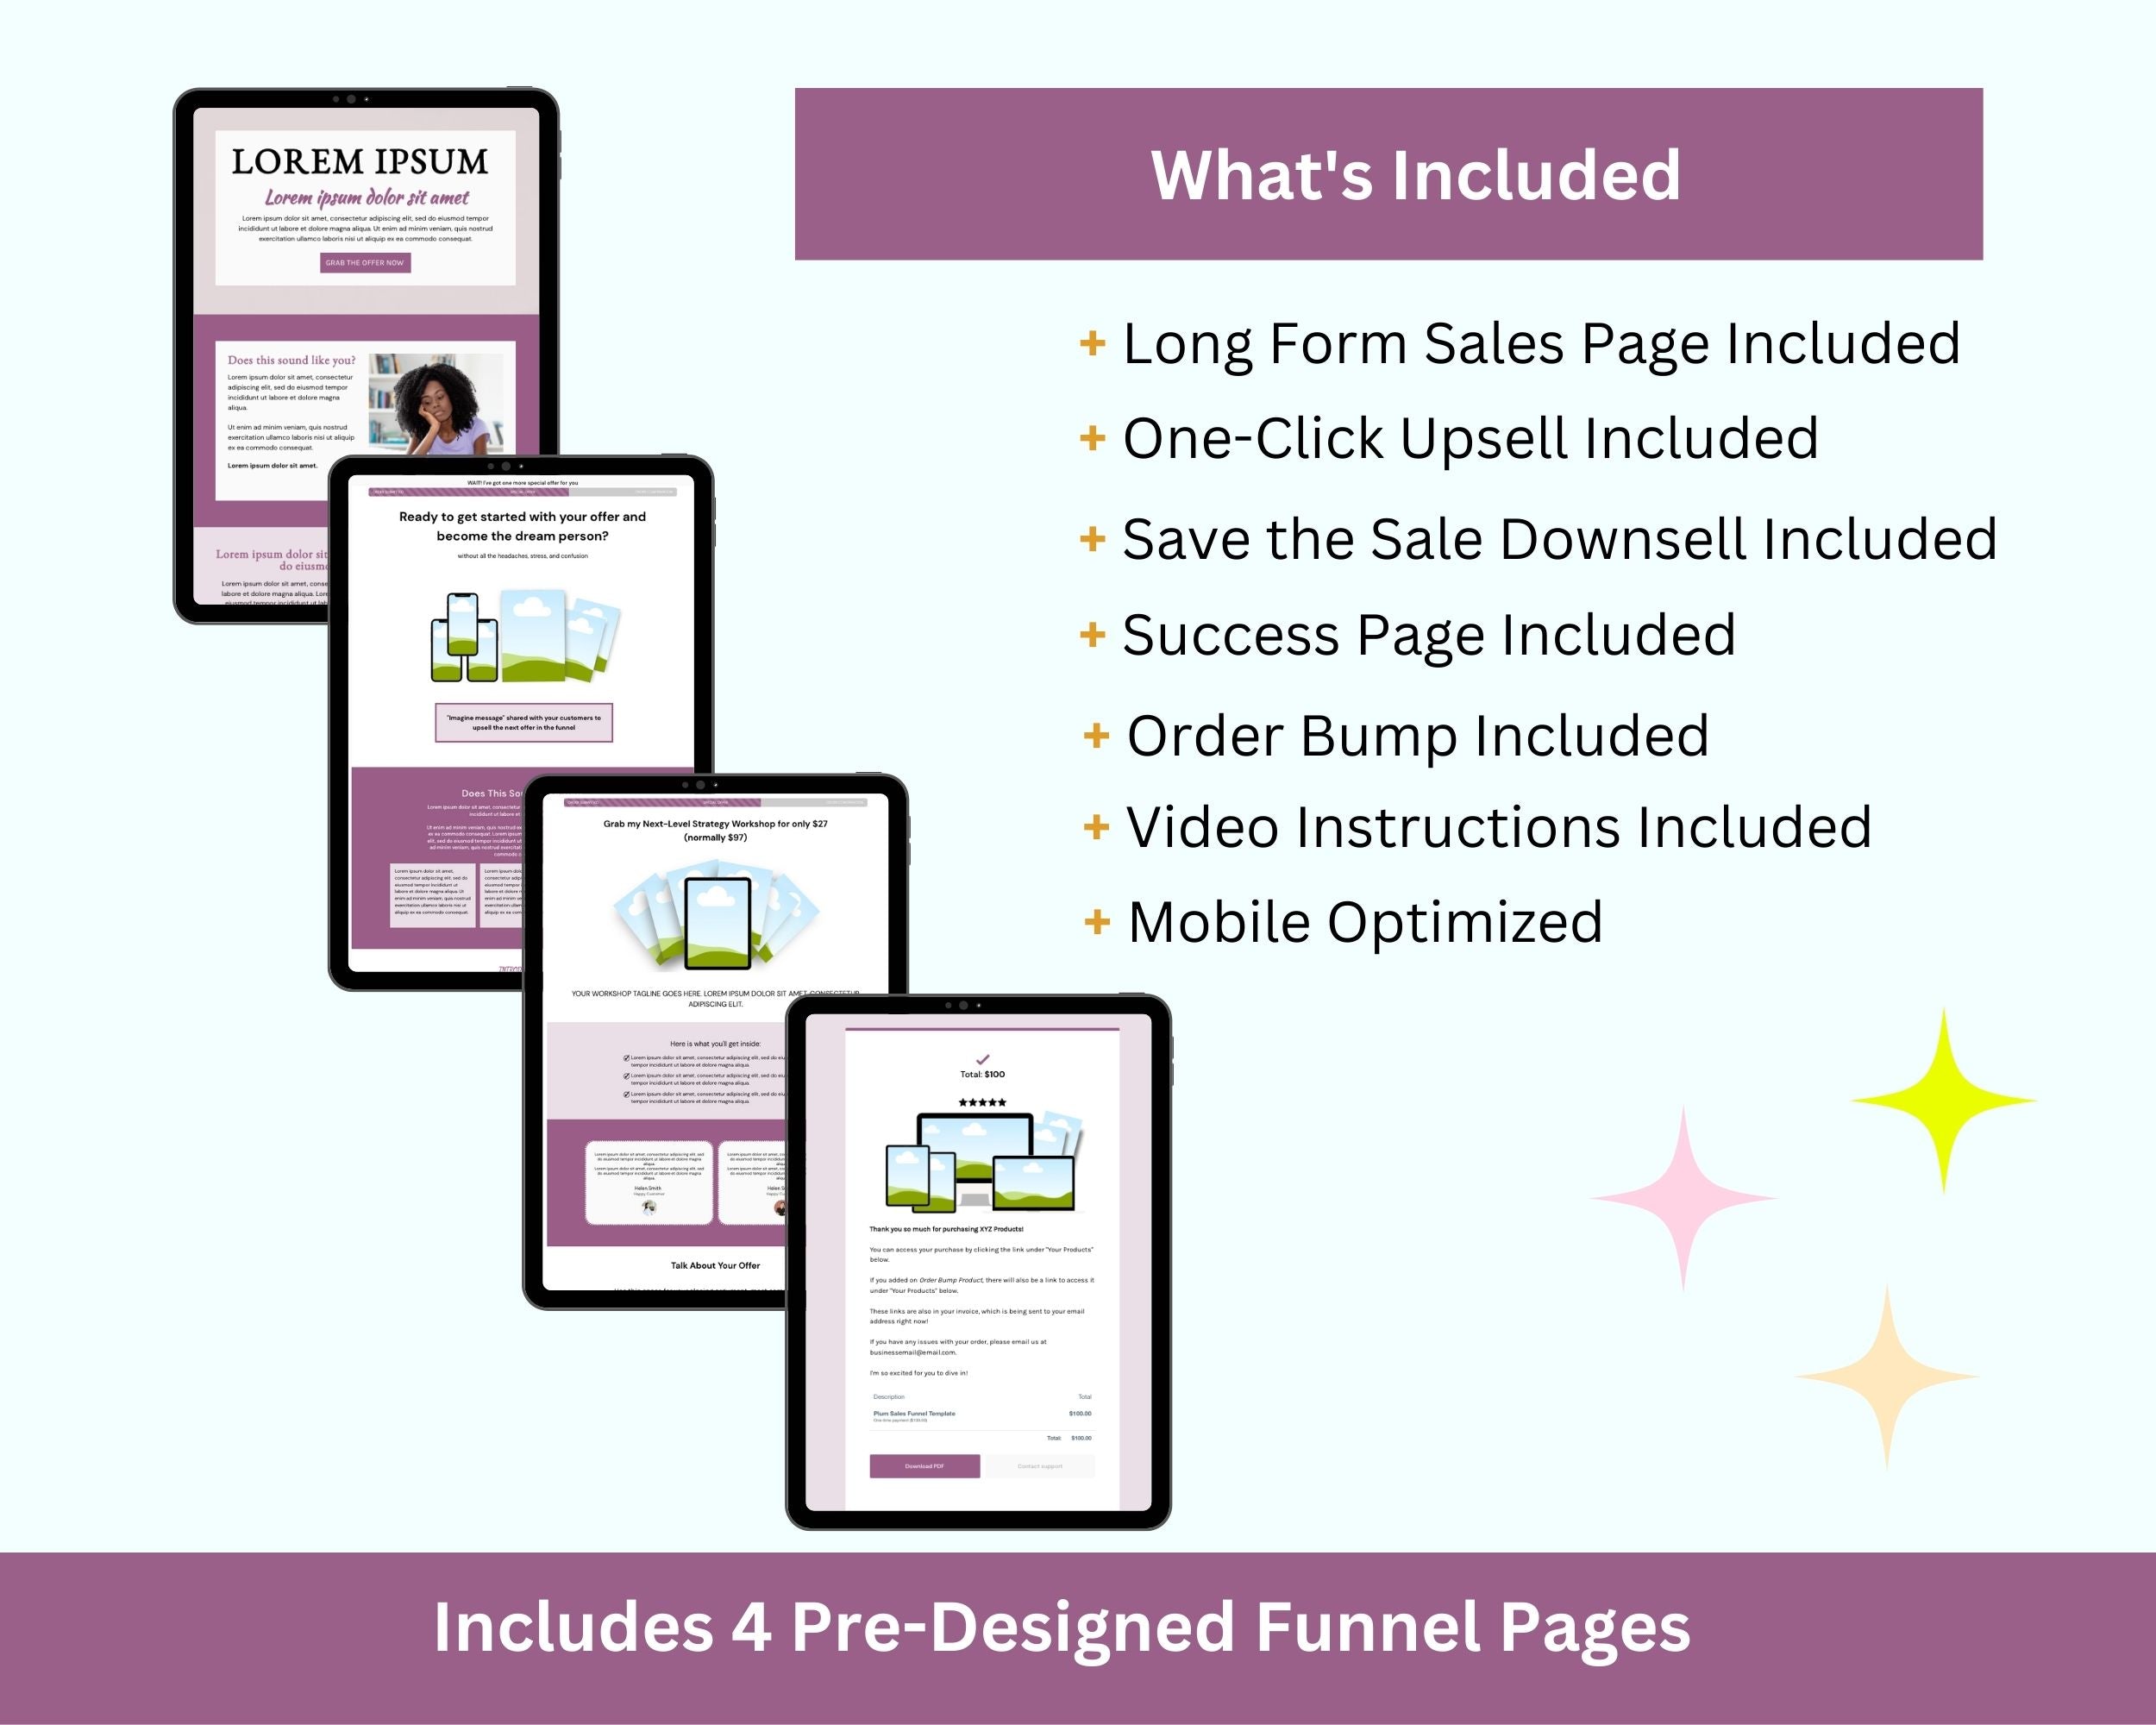 Plum ThriveCart 4-Page Sales Funnel Template